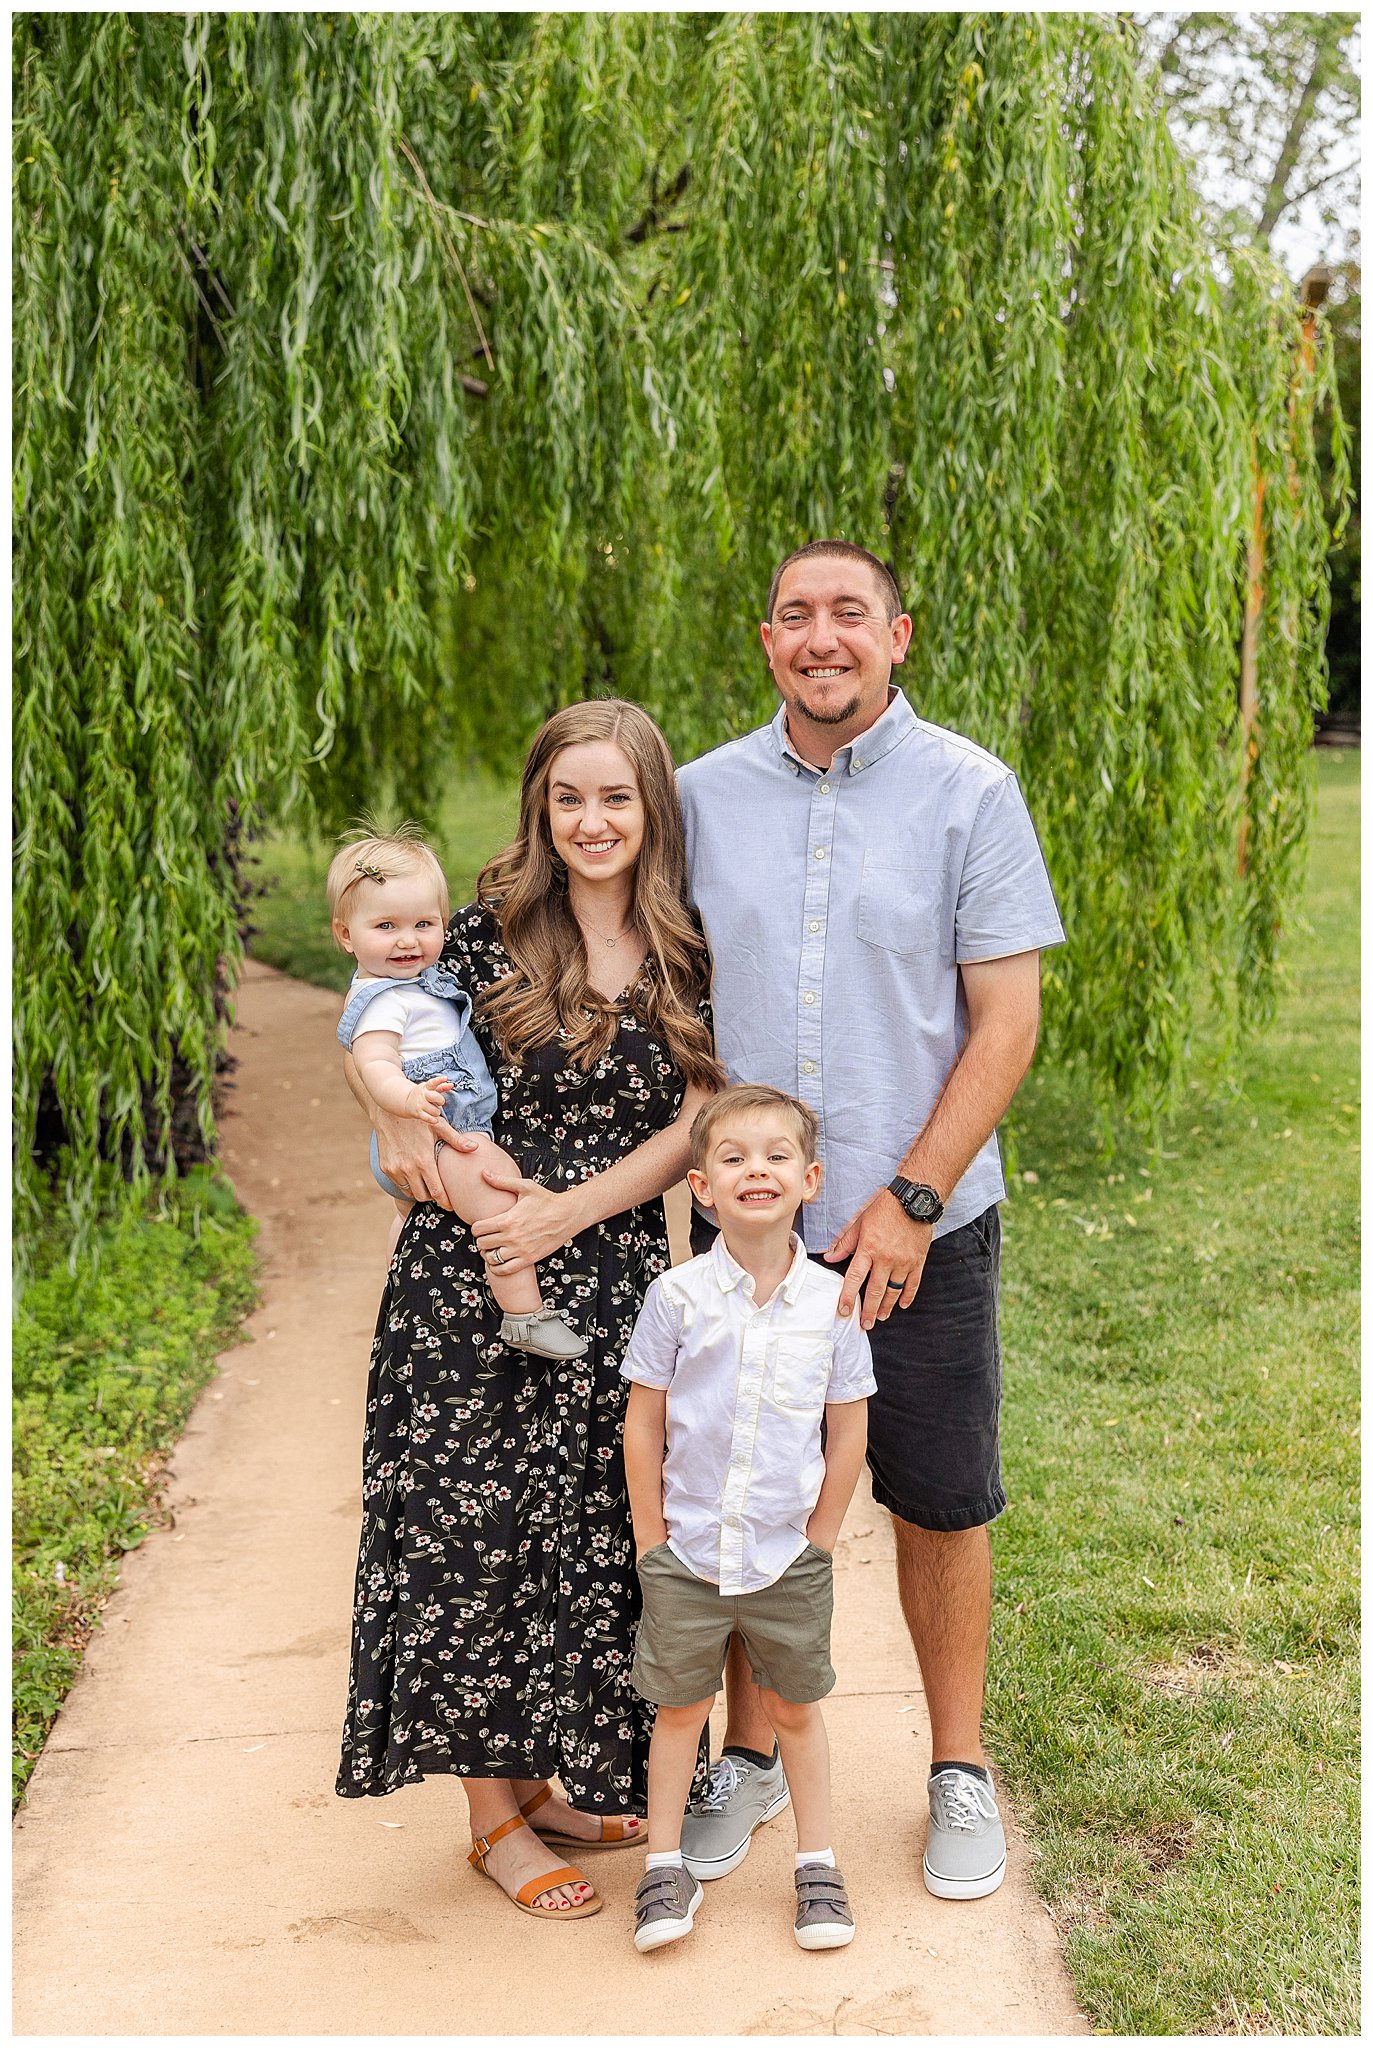 White Ranch Events Family Session in Chico CA with Willow Tree | Leslie + K.C.